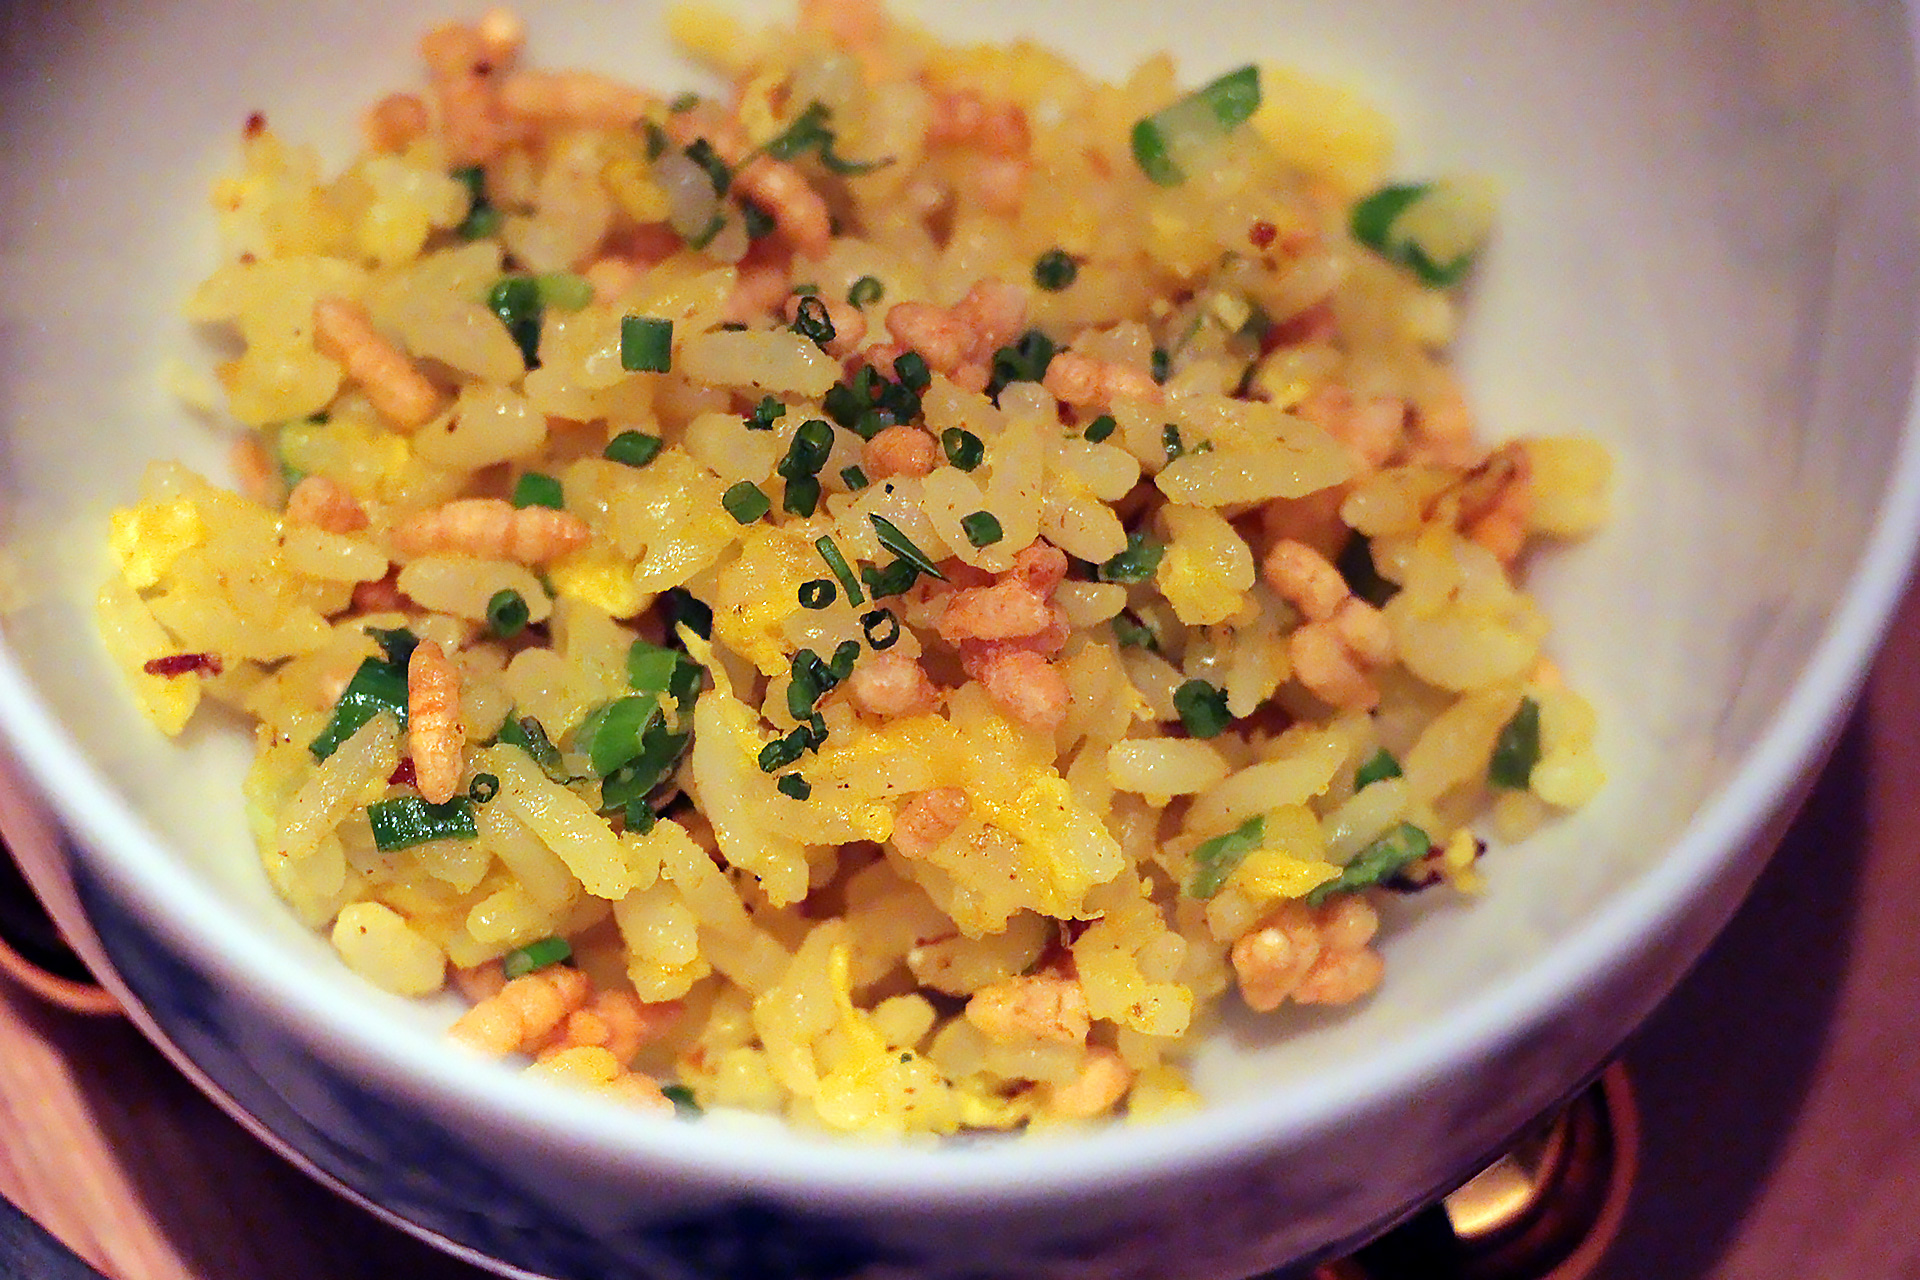 A bowl of fried rice with tiny pieces of egg and a crisped-rice garnish.